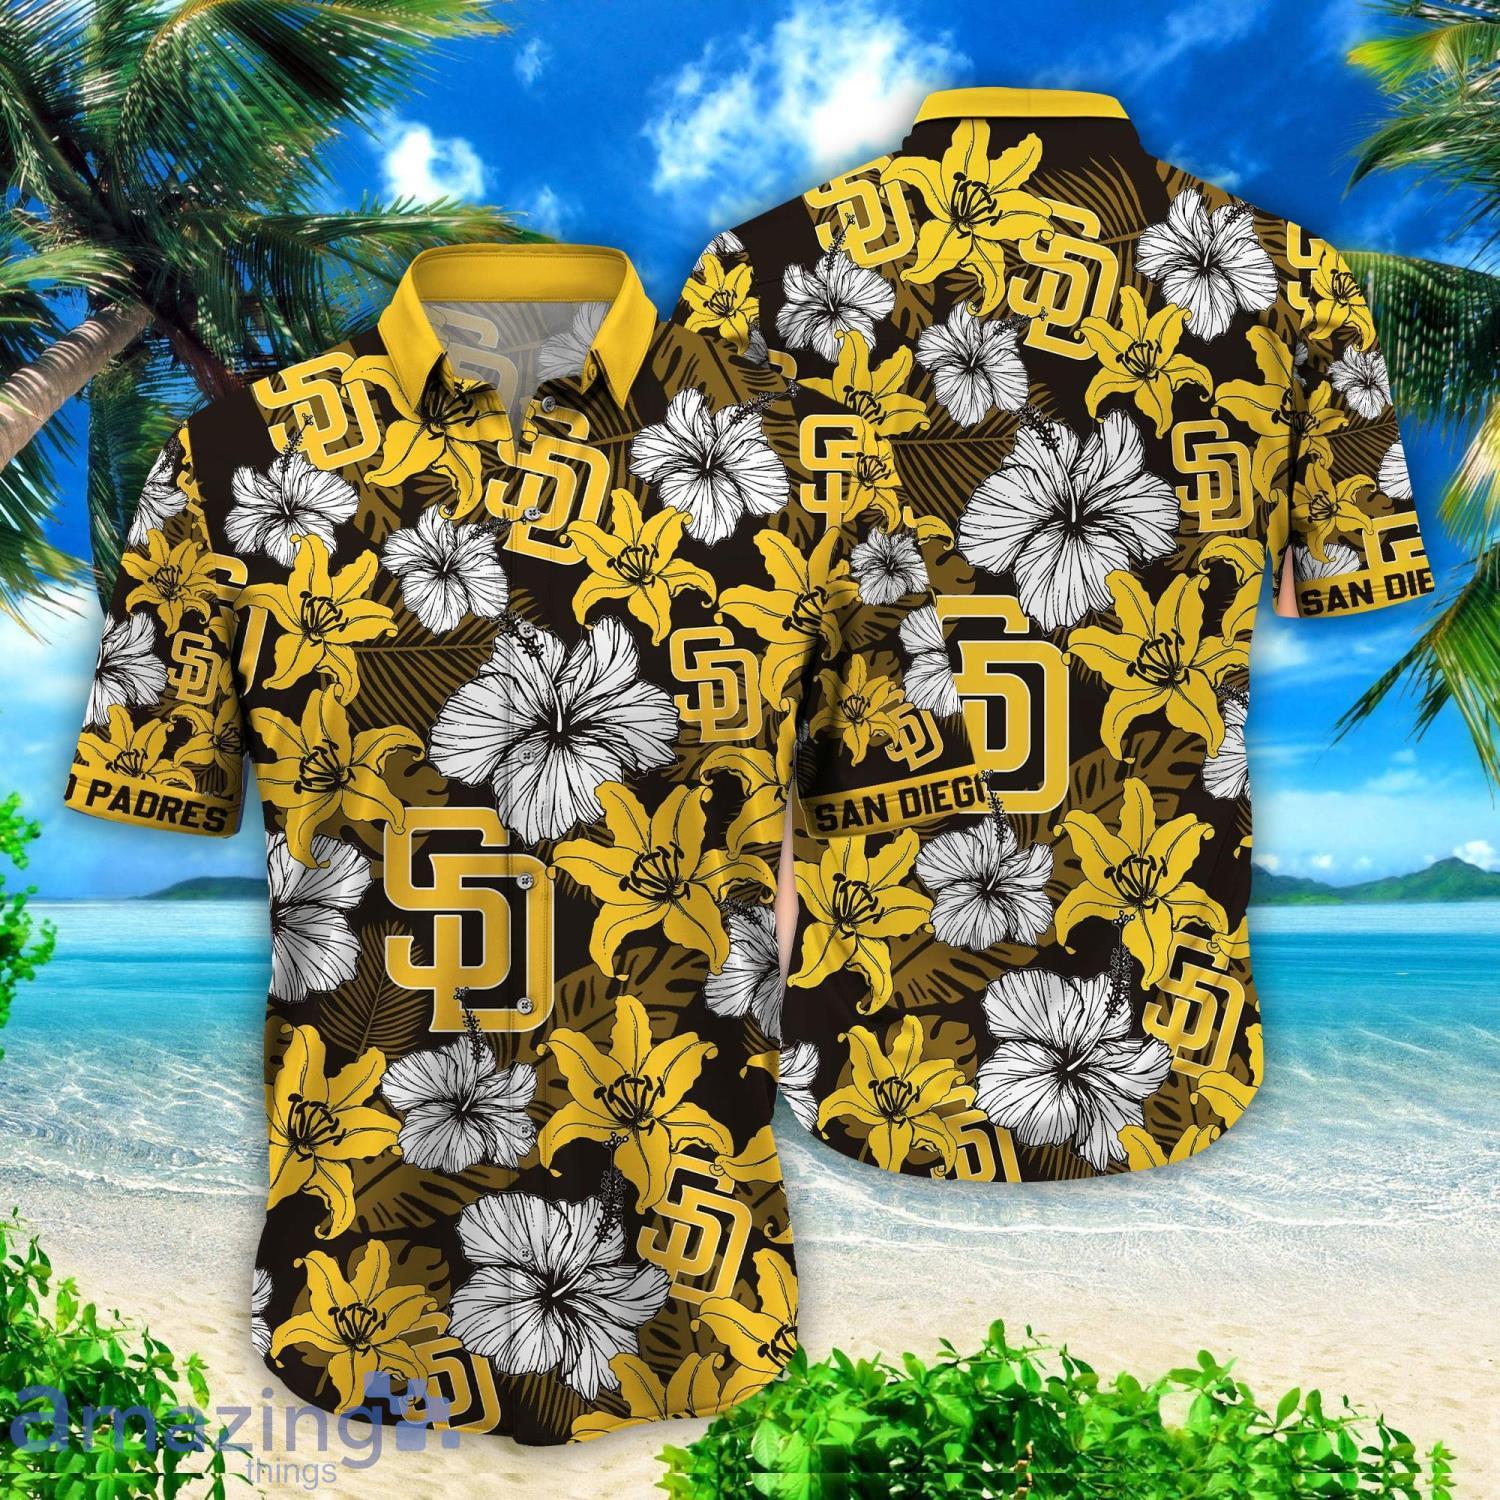 San Diego Padres Unisex Adult MLB Jerseys for sale